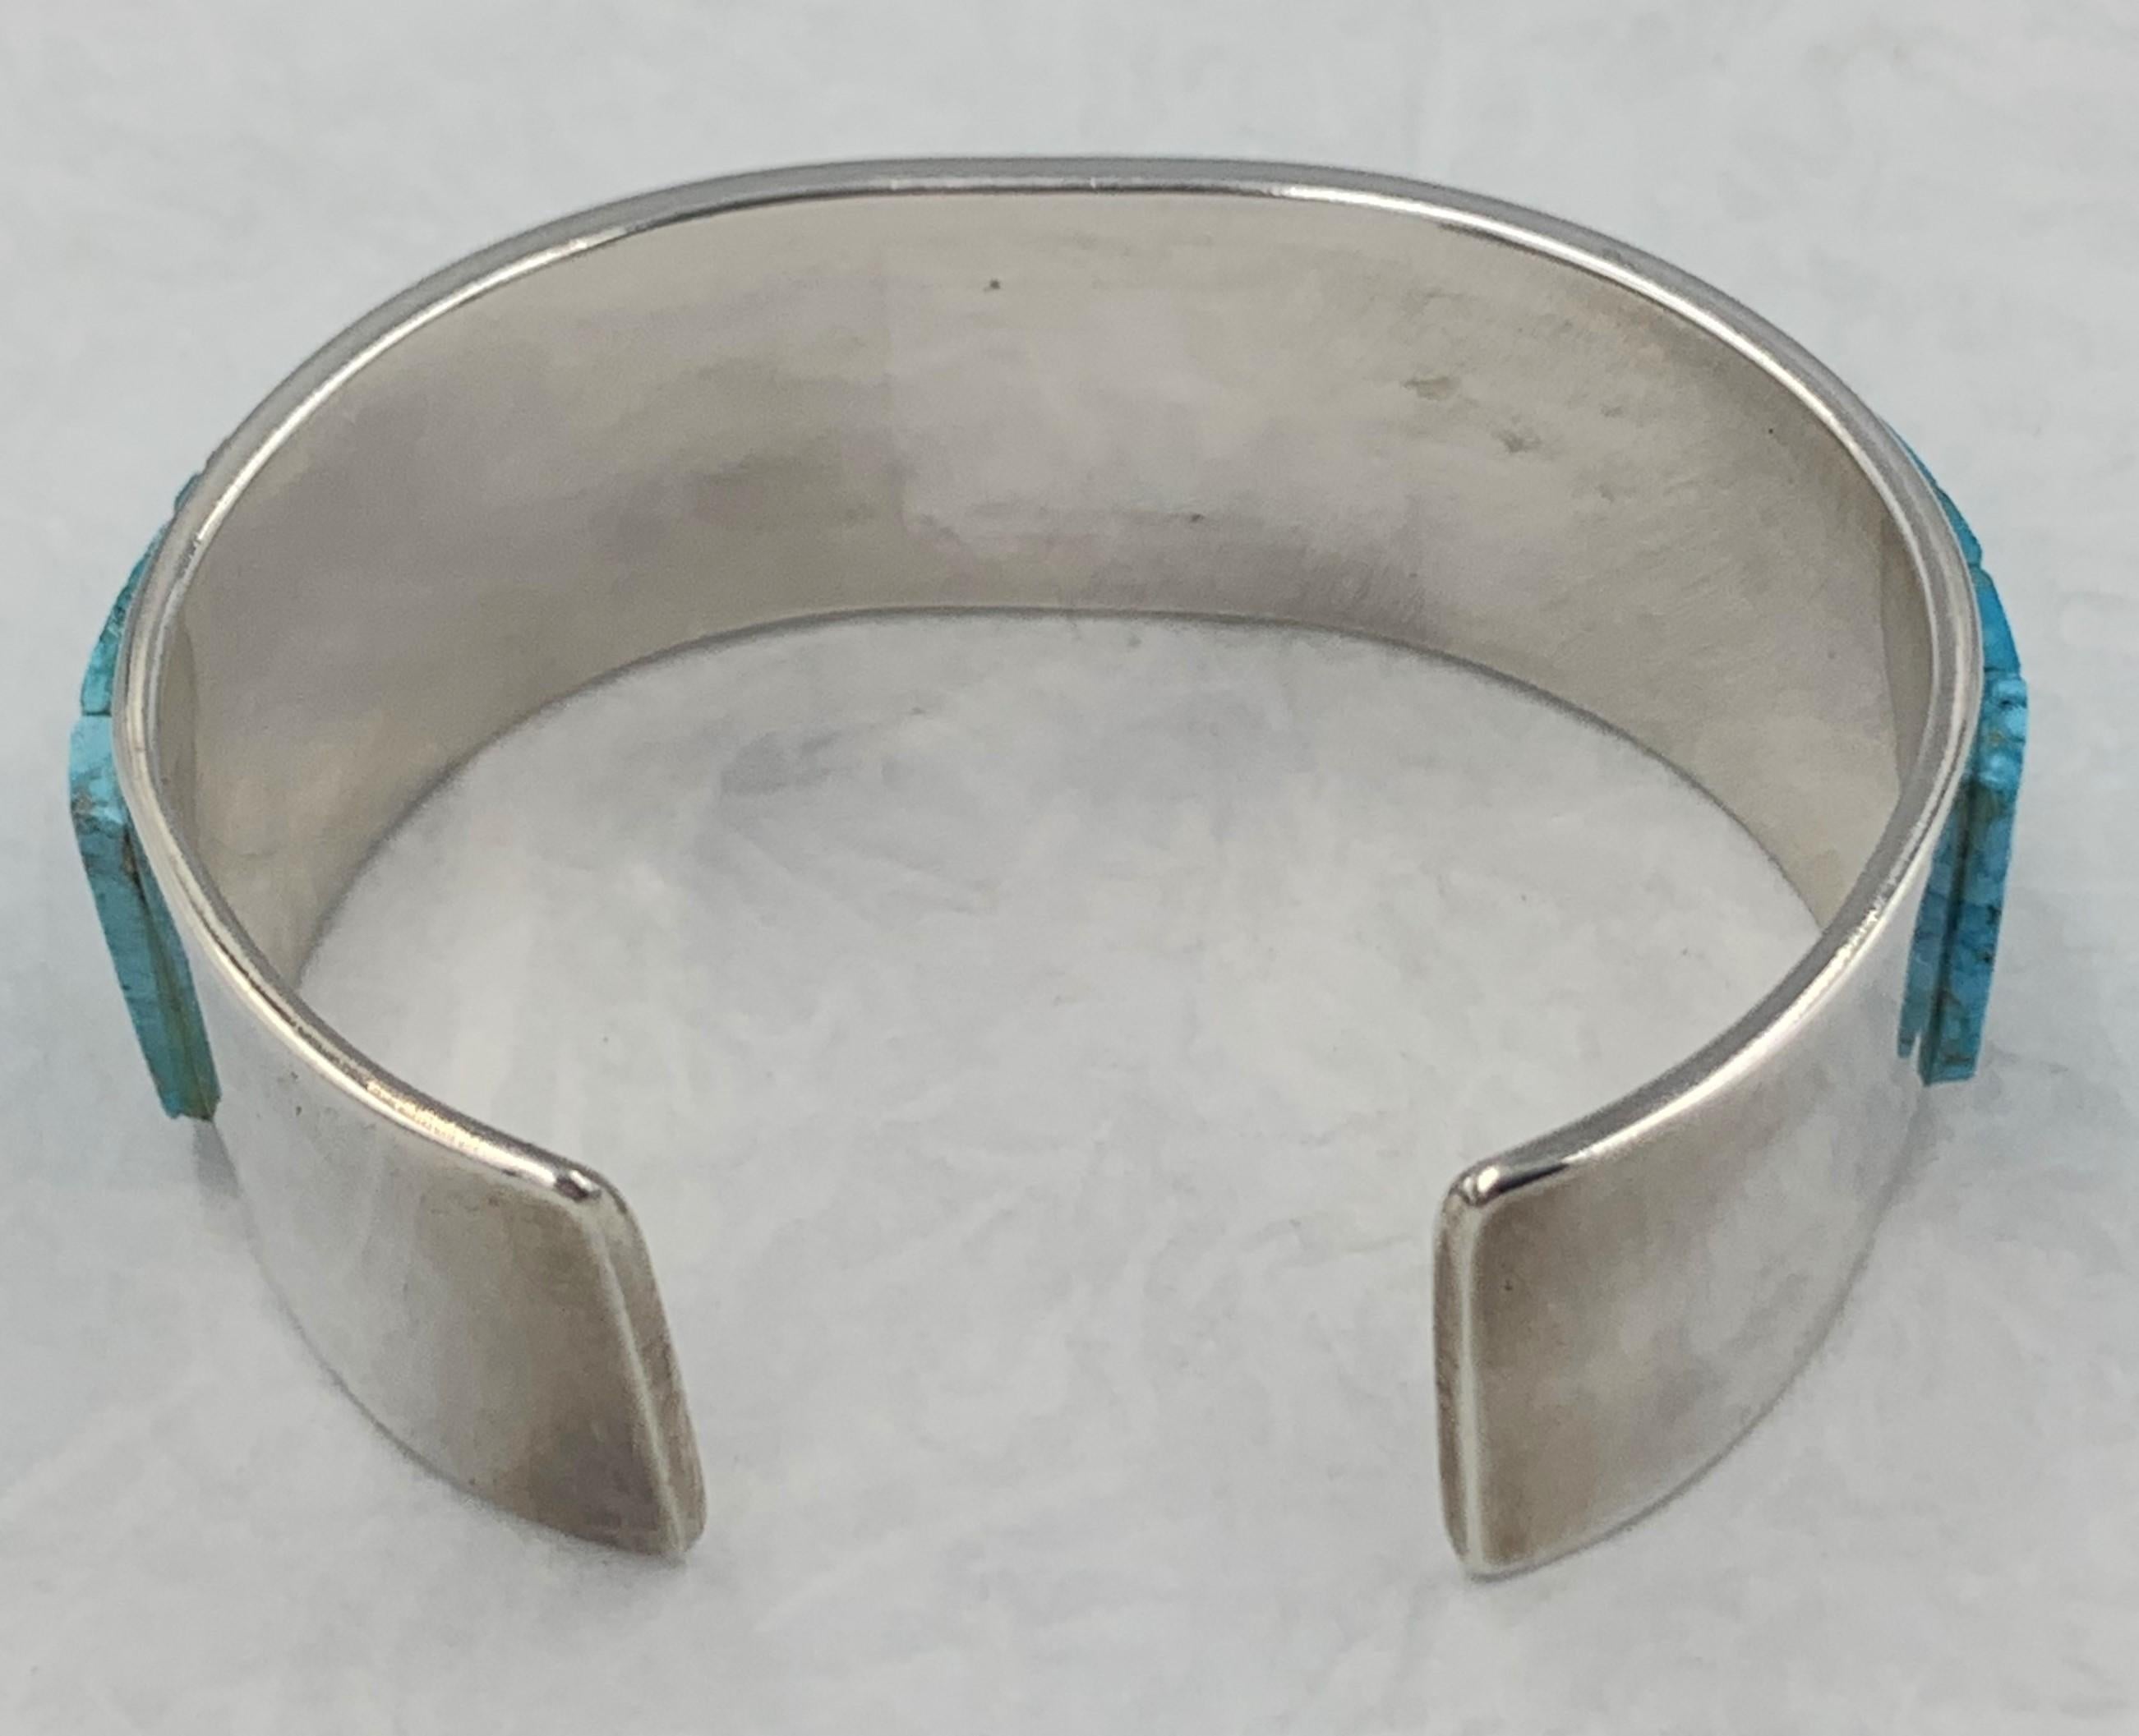 Native American Kingman Turquoise Inlay Sterling Silver Cuff by Tommy Jackson For Sale